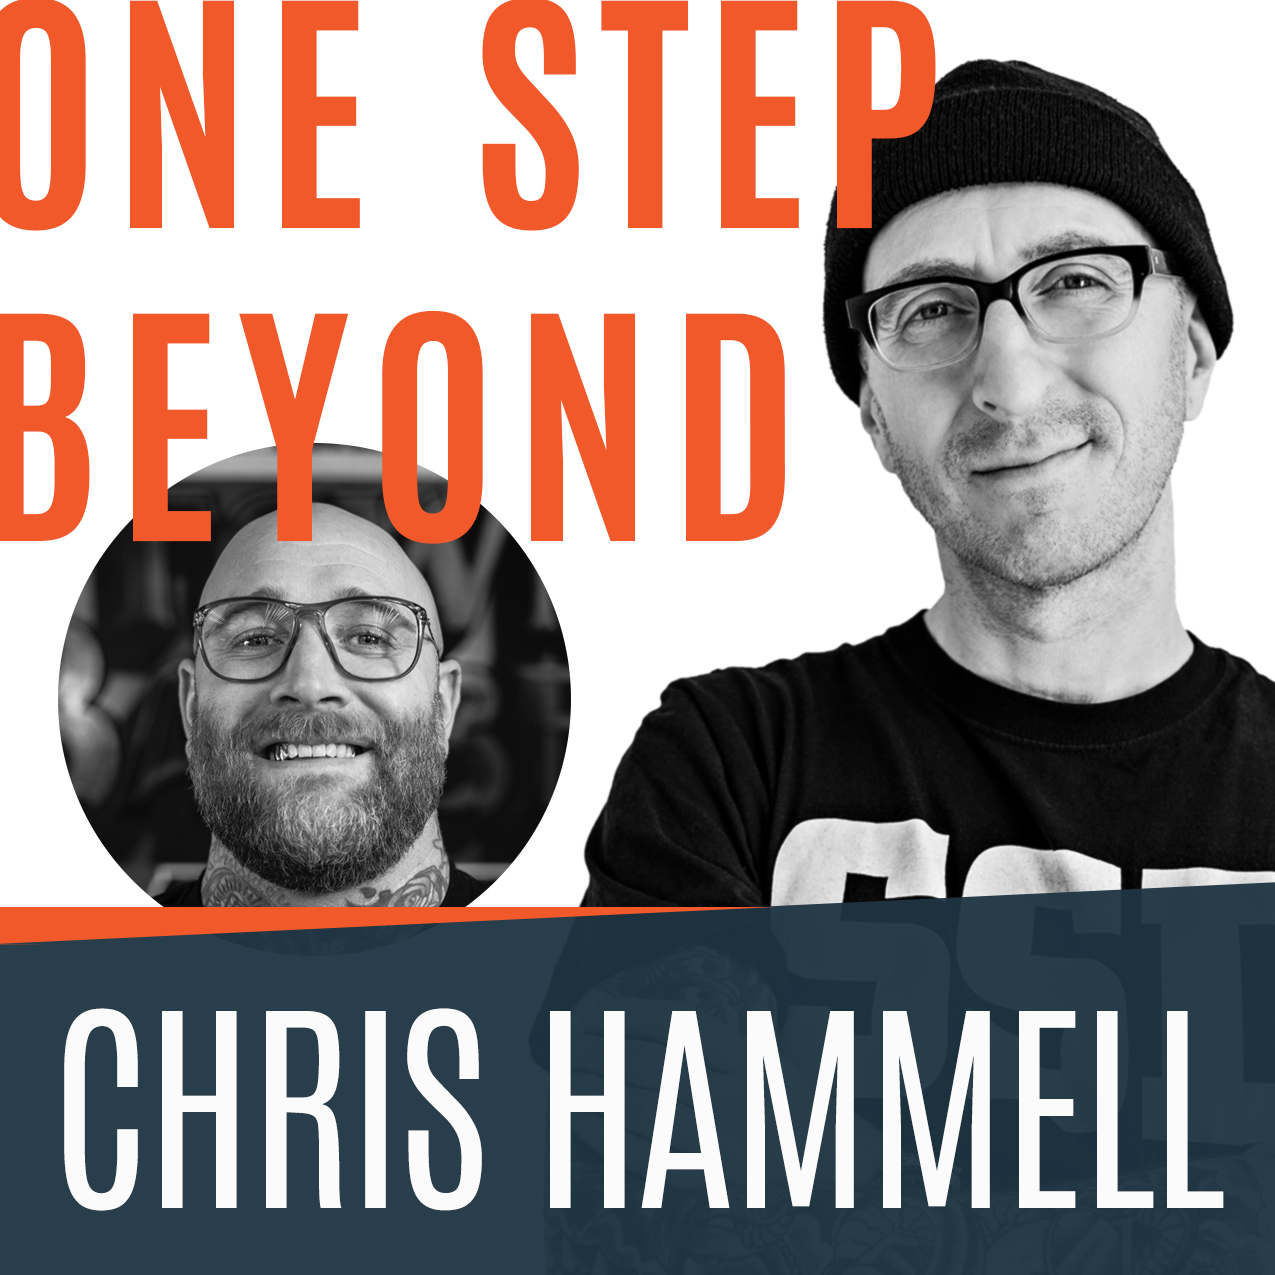 One Step Beyond Podcast featuring Chris Hammell